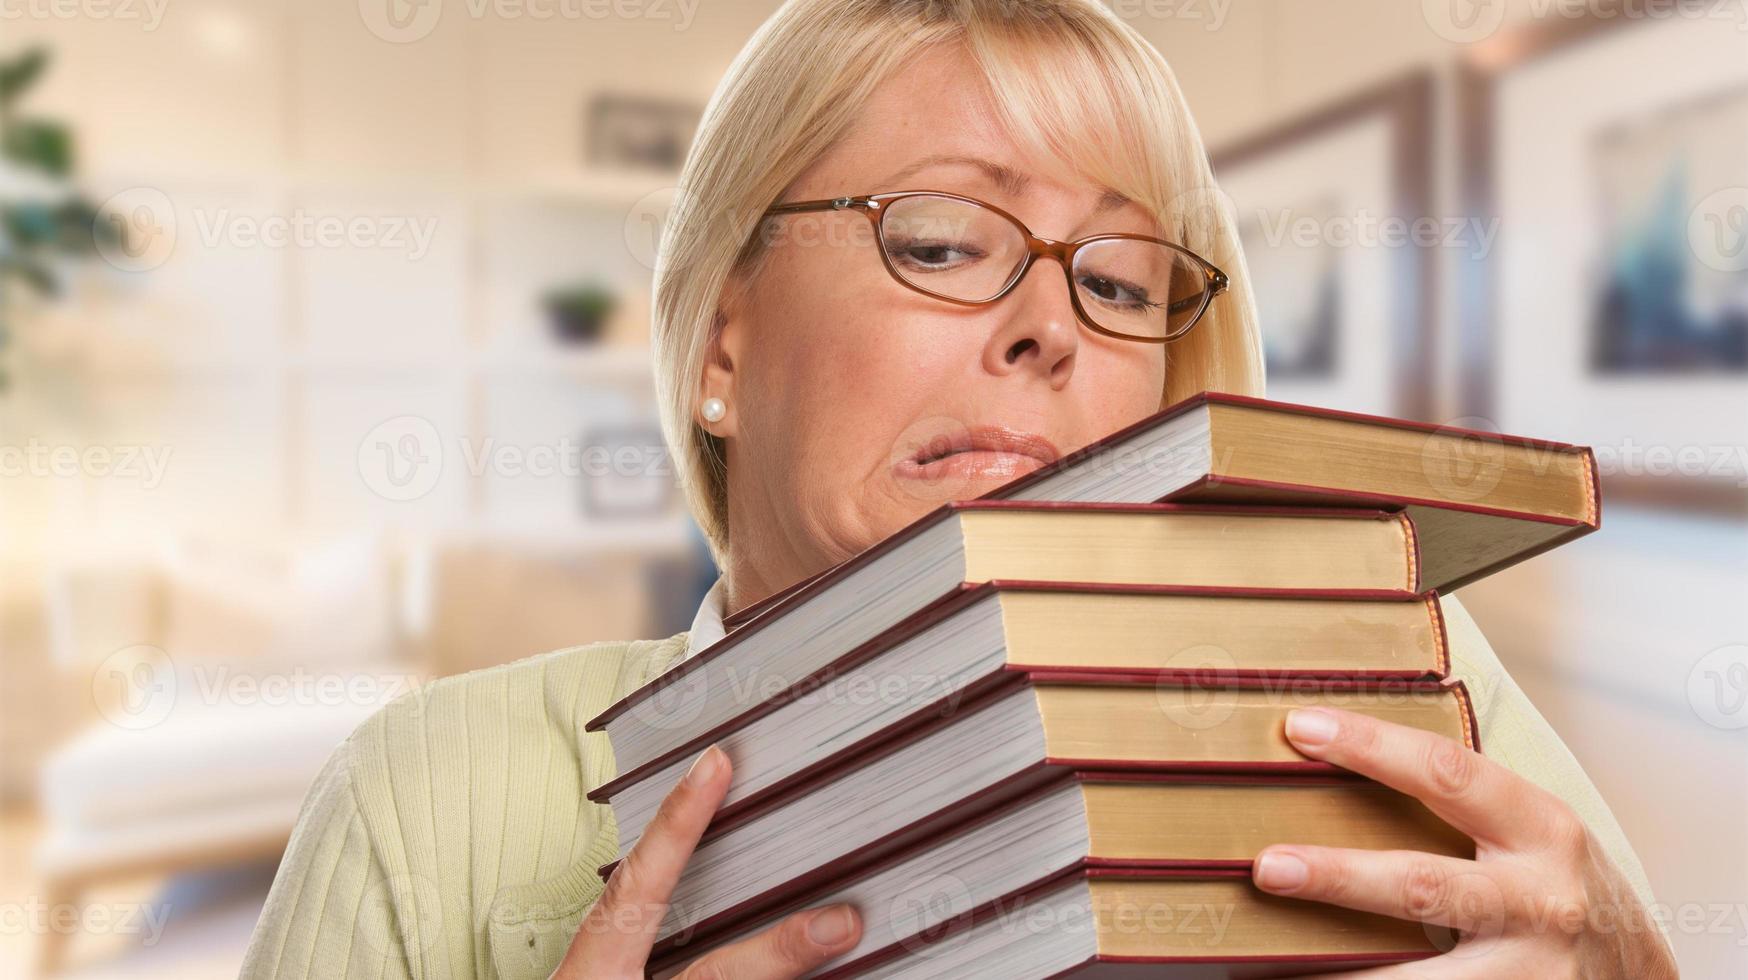 Beautiful Expressive Student or Businesswoman with Books in Office. photo